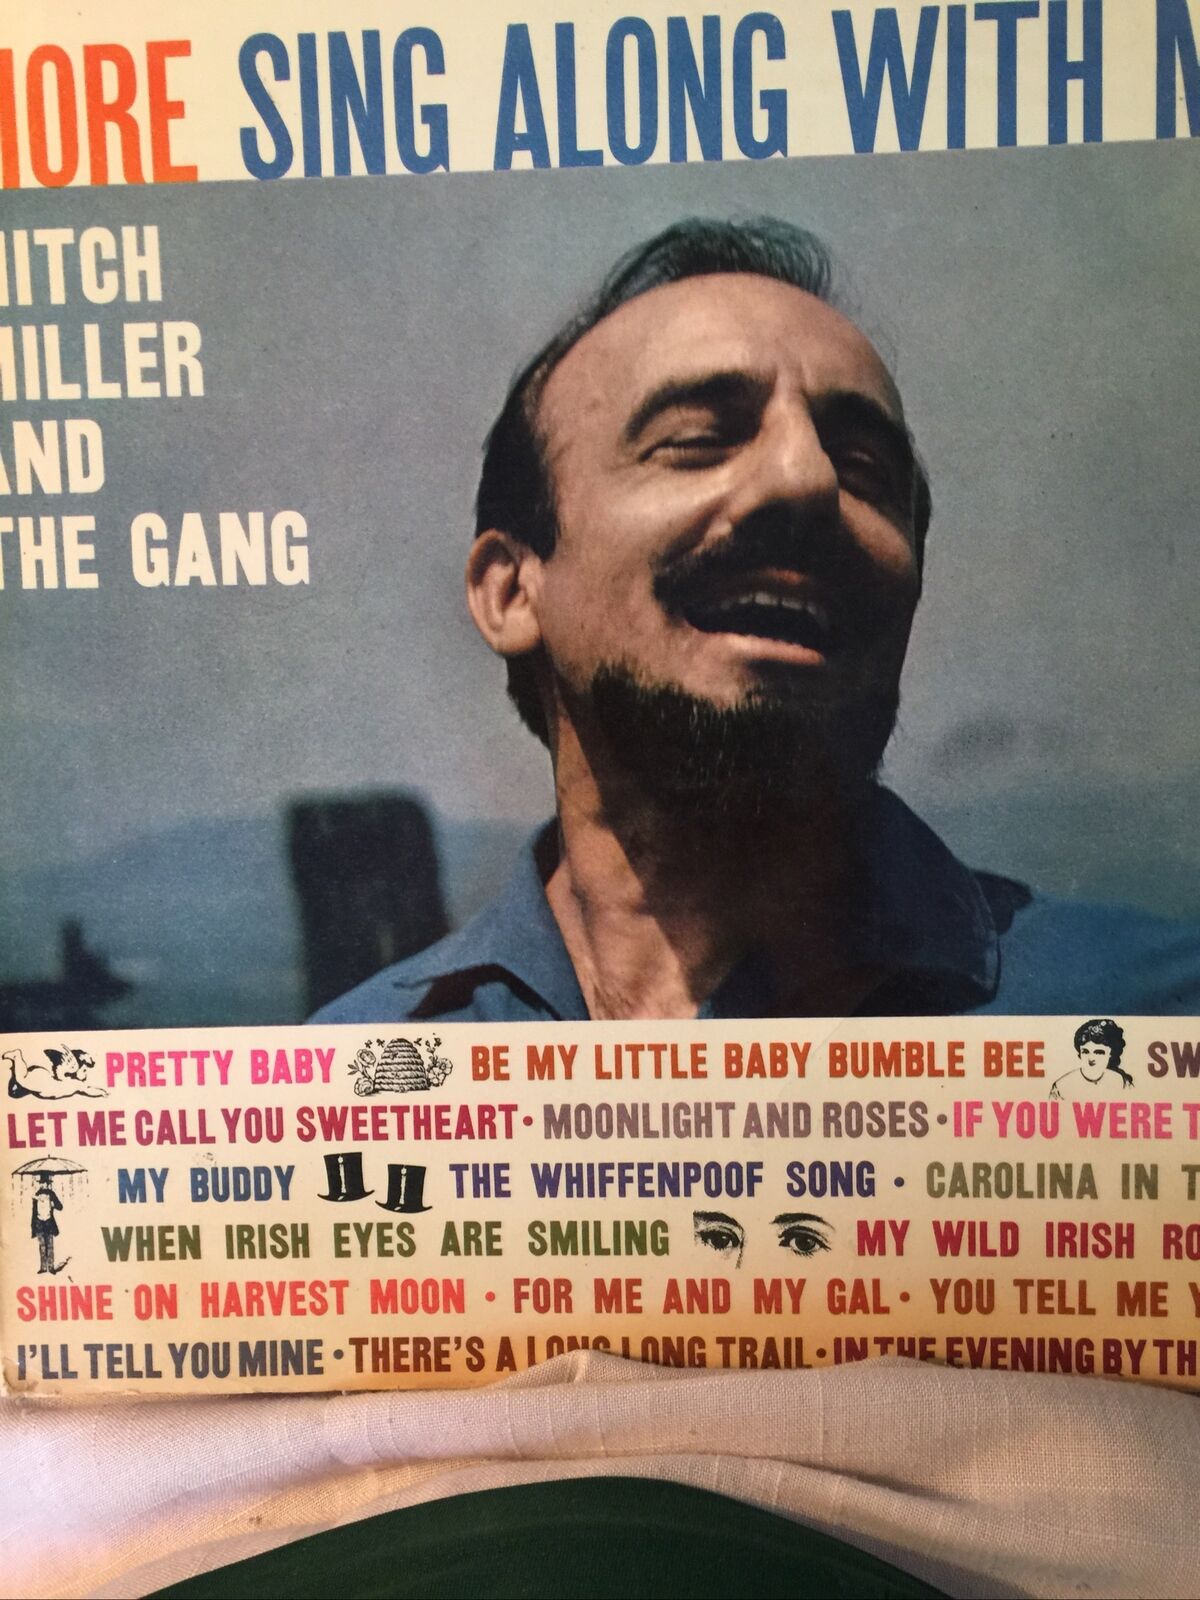 Mitch Miller and the Gang...."More Sing Along With Mitch" 12" Vinyl Record LP 